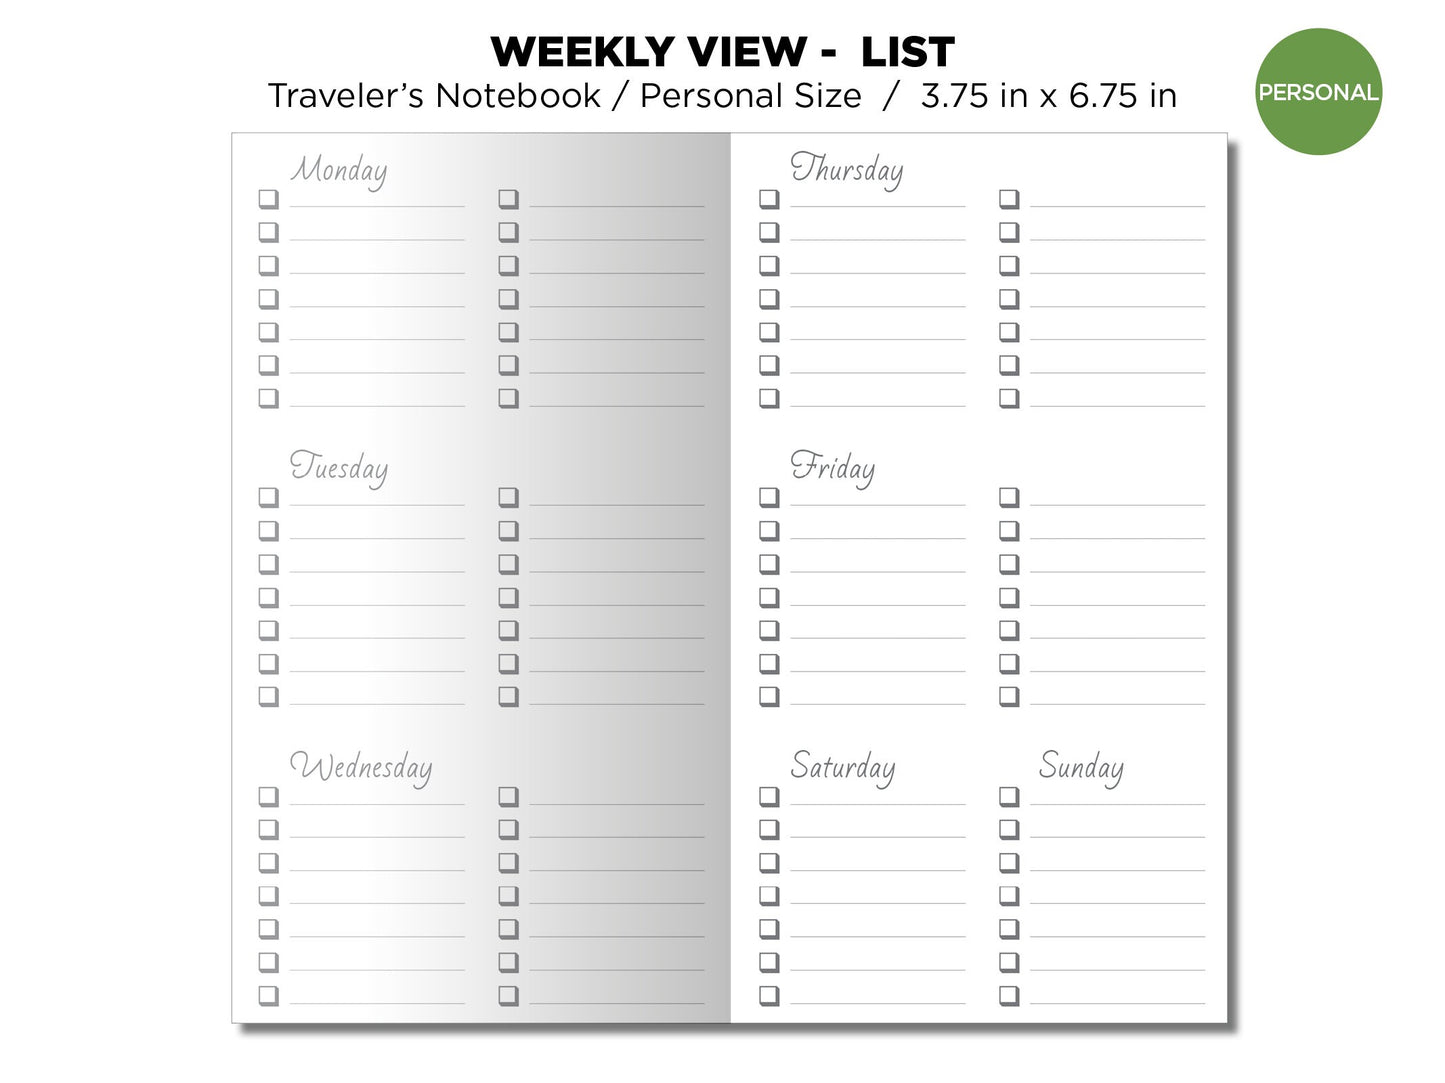 TN Personal Size Weekly View Horizontal -  List - Traveler's Notebook Printable Insert